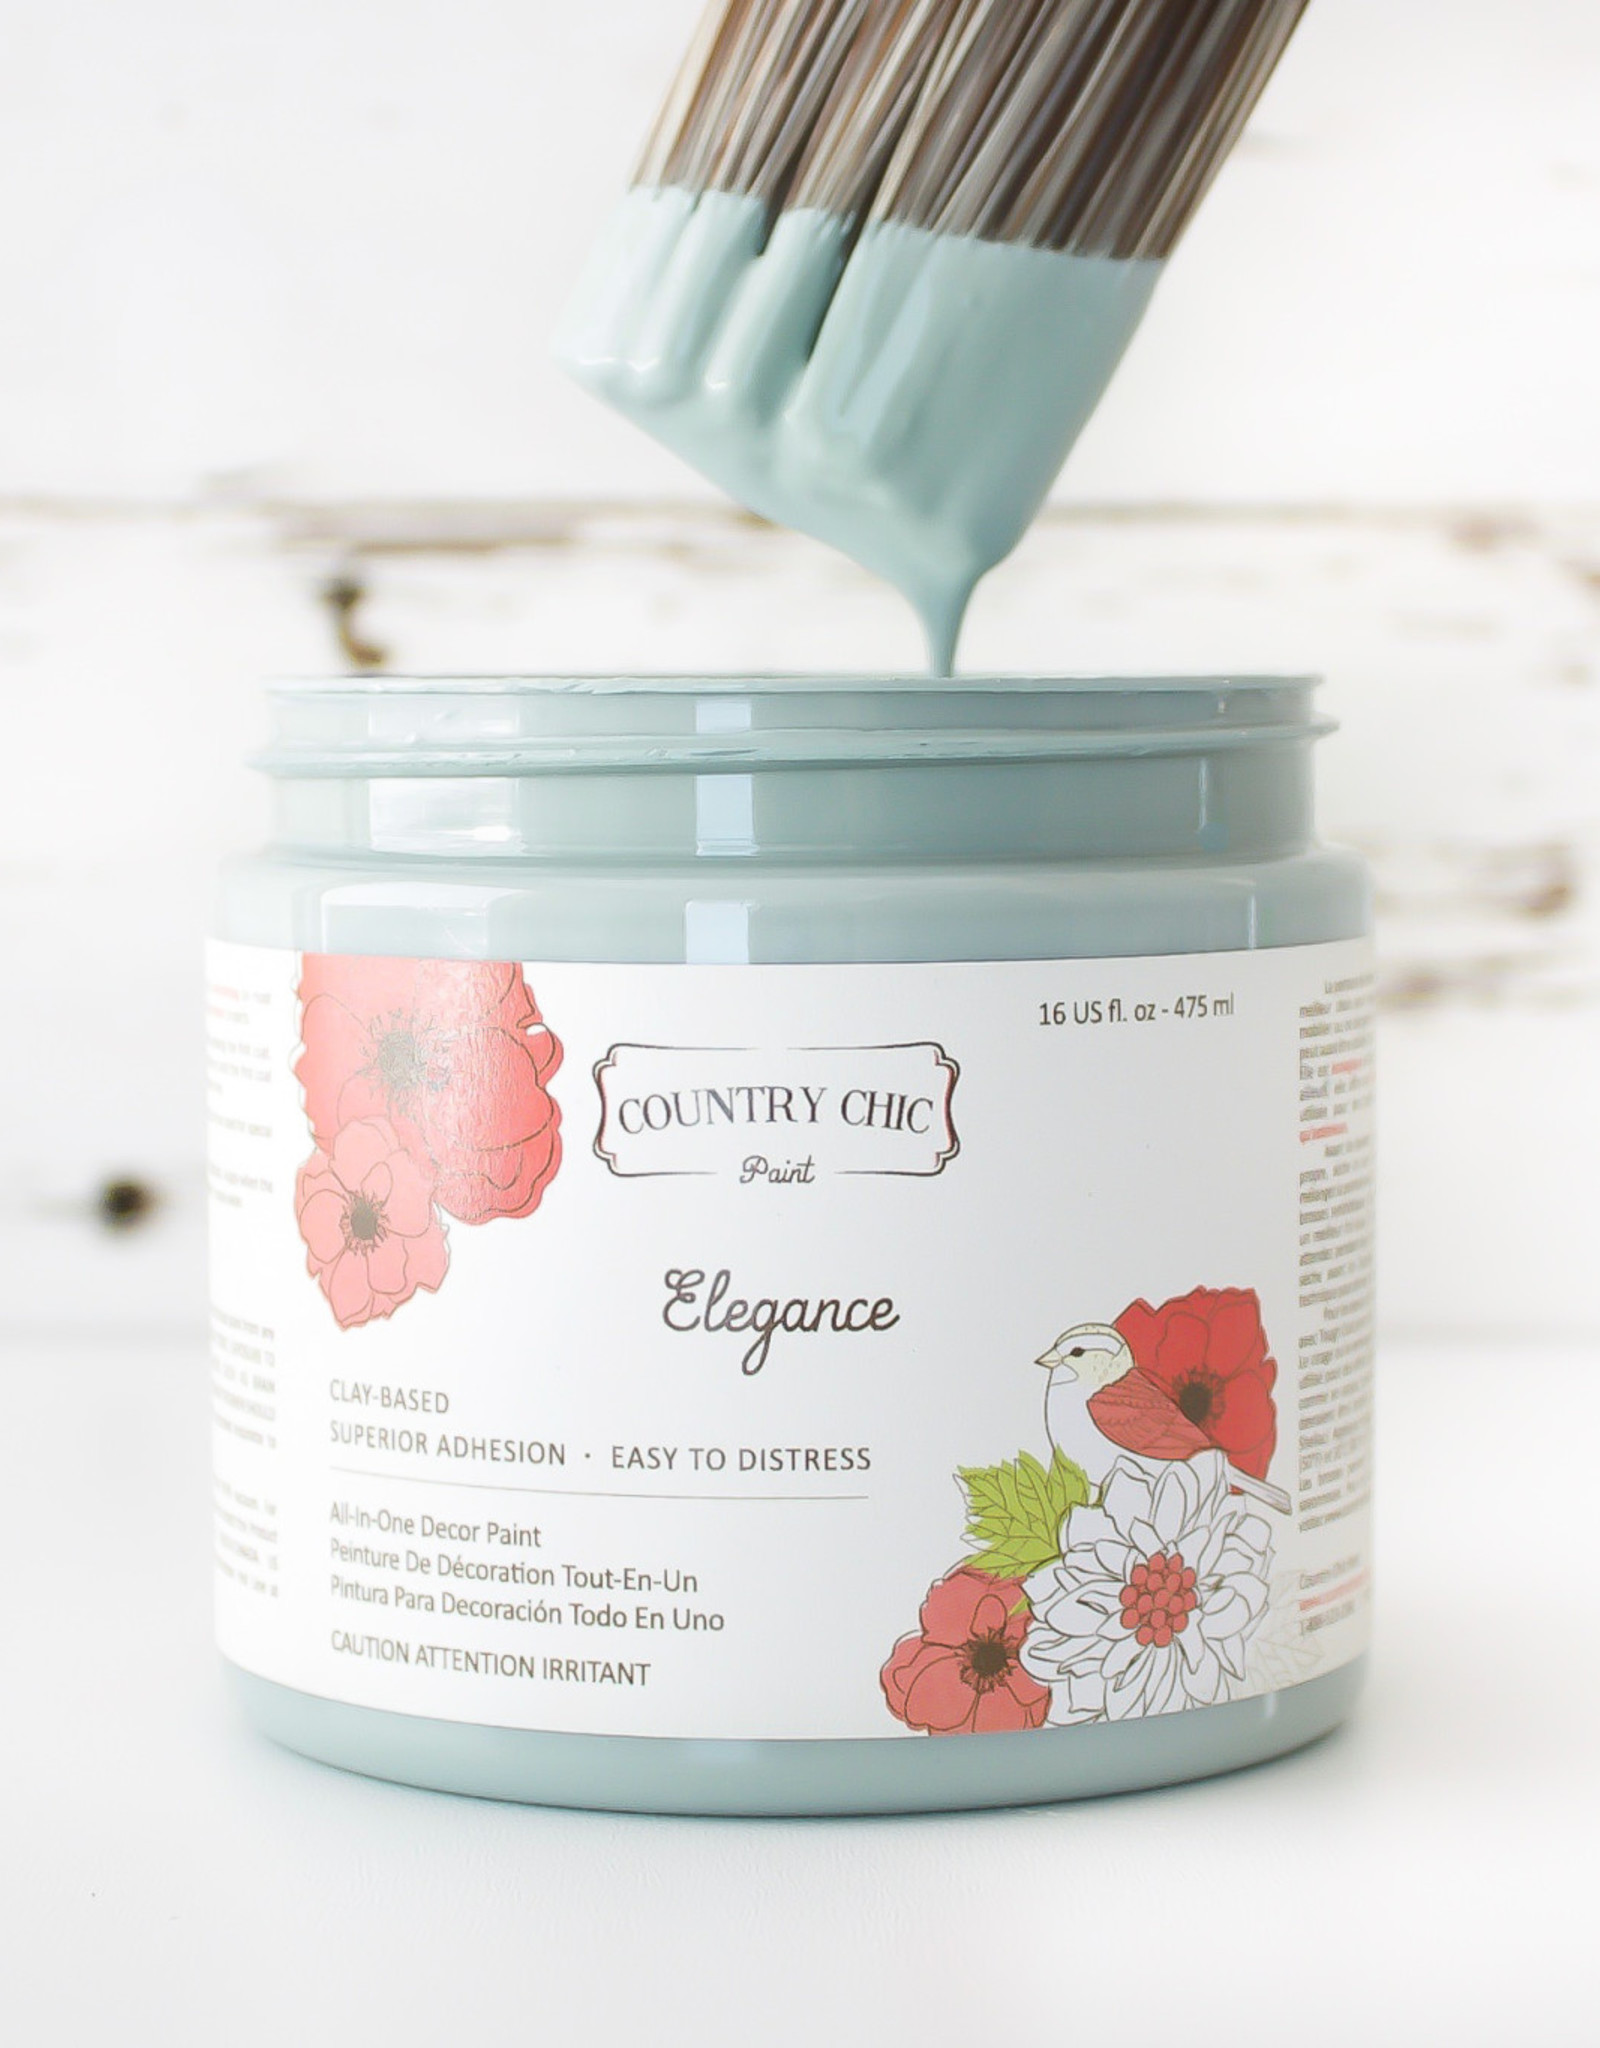 Country Chic Country Chic Paint Sample - 4oz Elegance